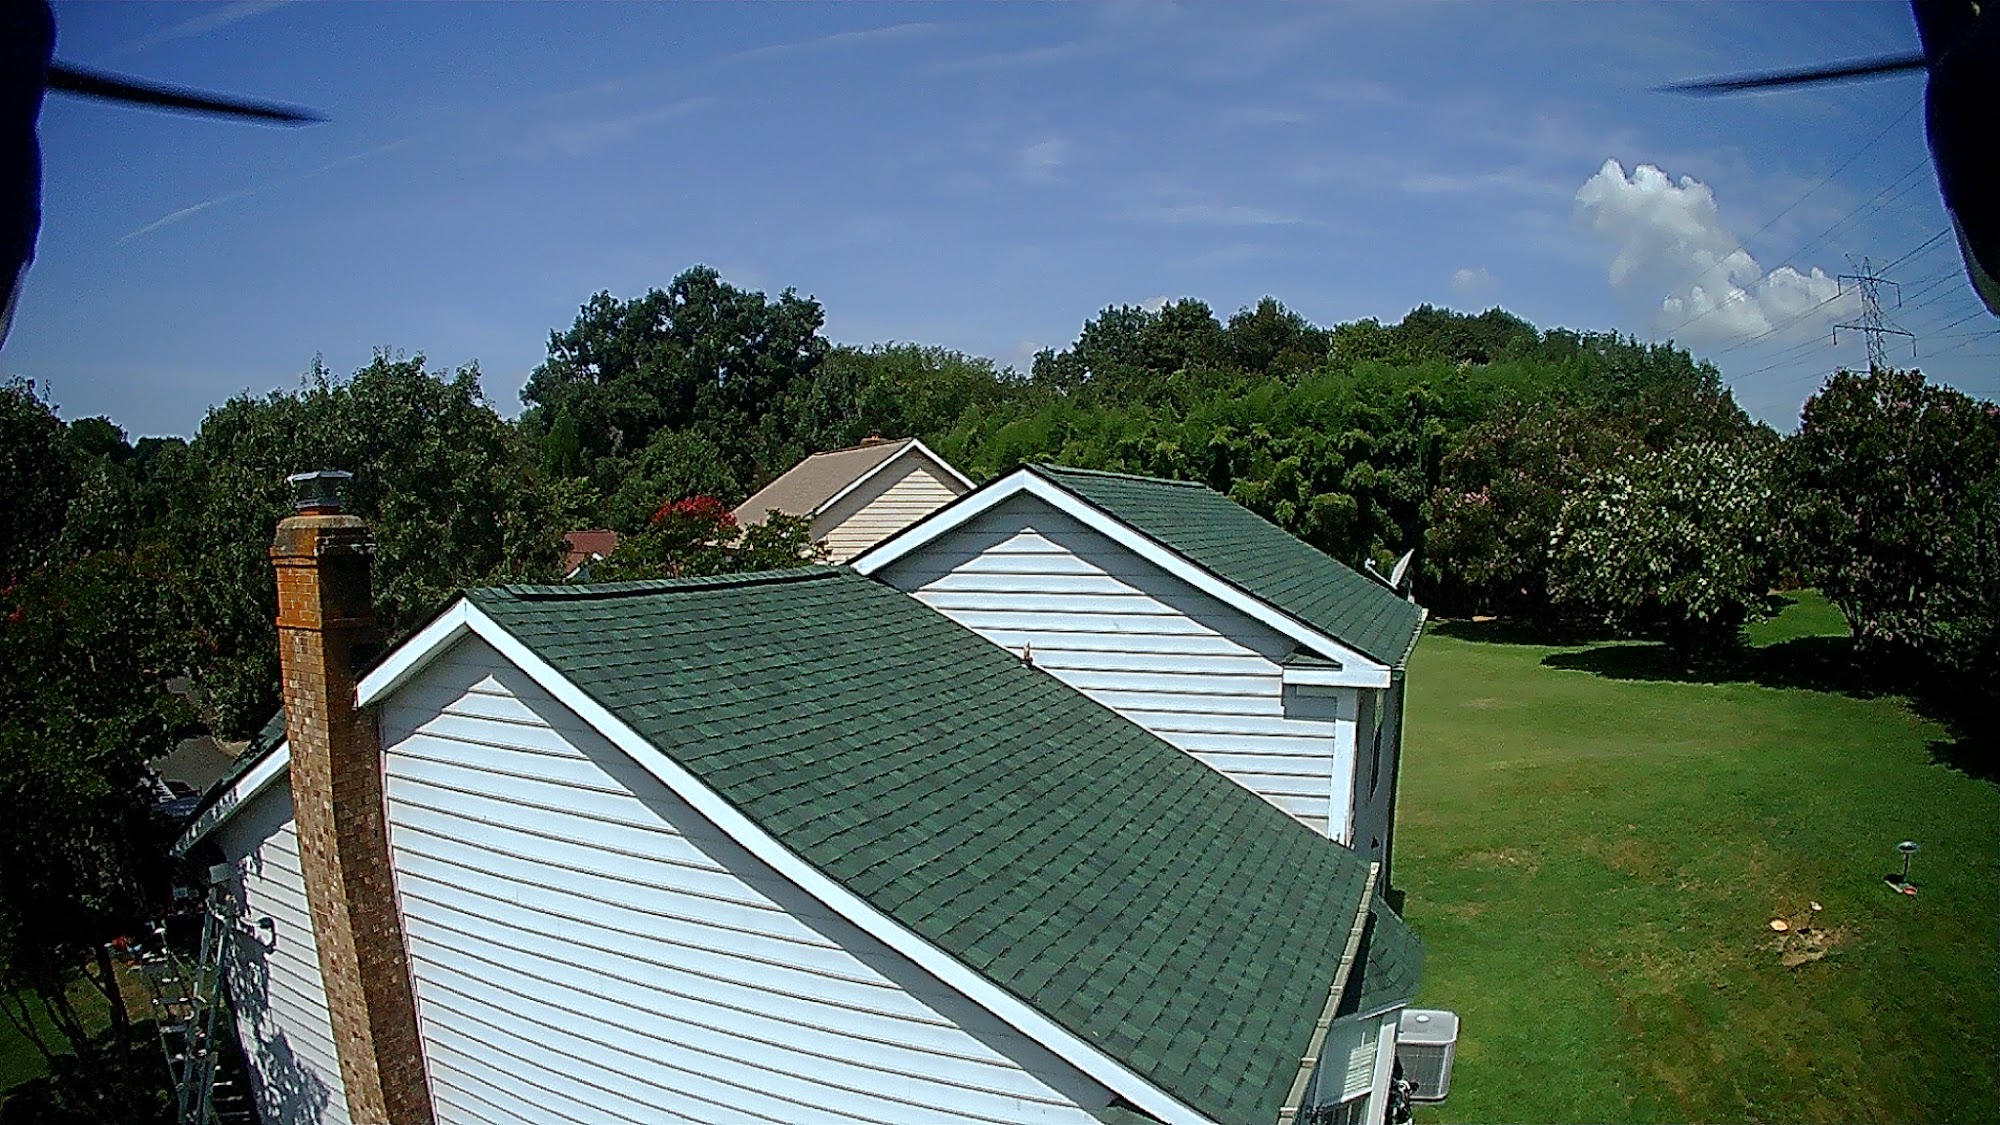 Iredell Roofing 3318 Danial St, Conover North Carolina 28613